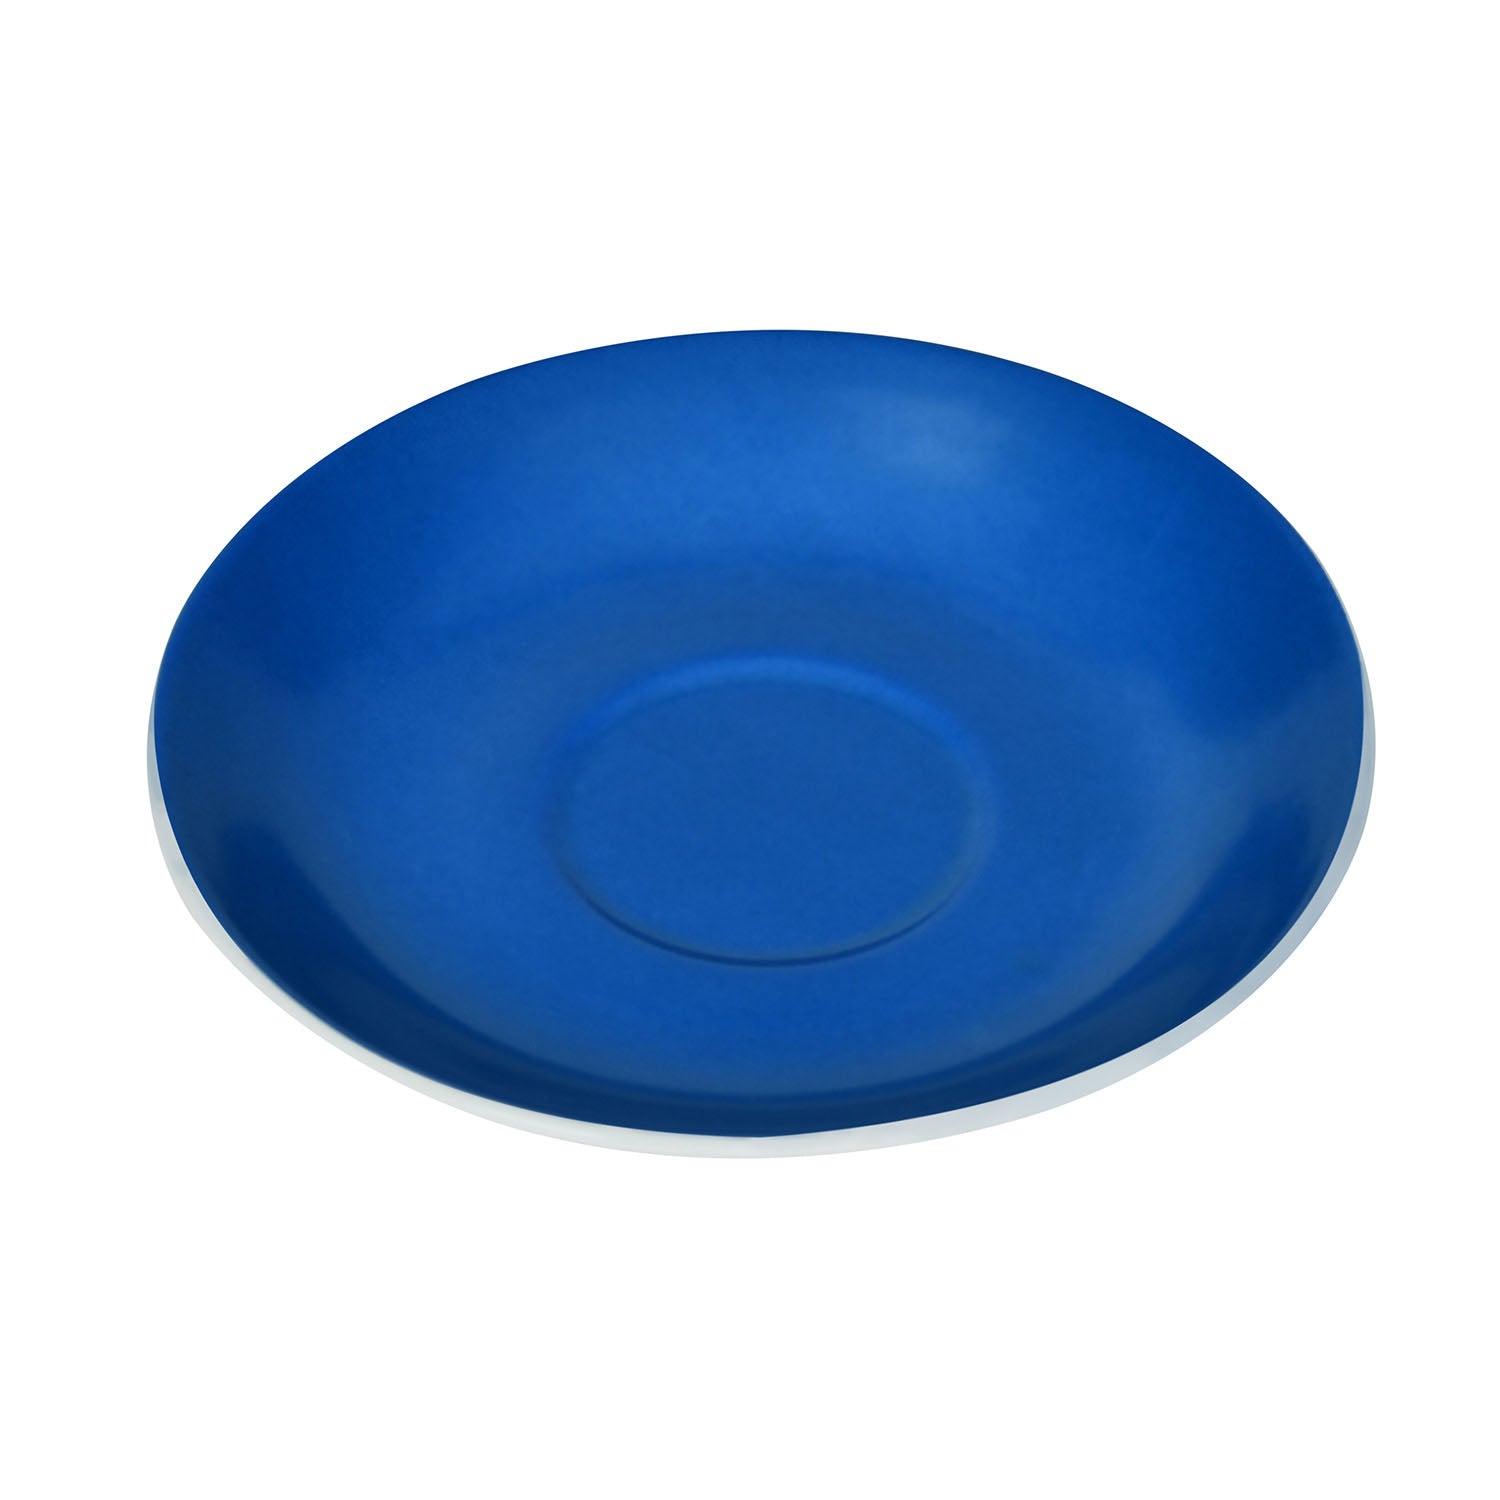 Clay Craft Ceramic 210 ml Cup & Saucer Set of 12 (Blue & White)